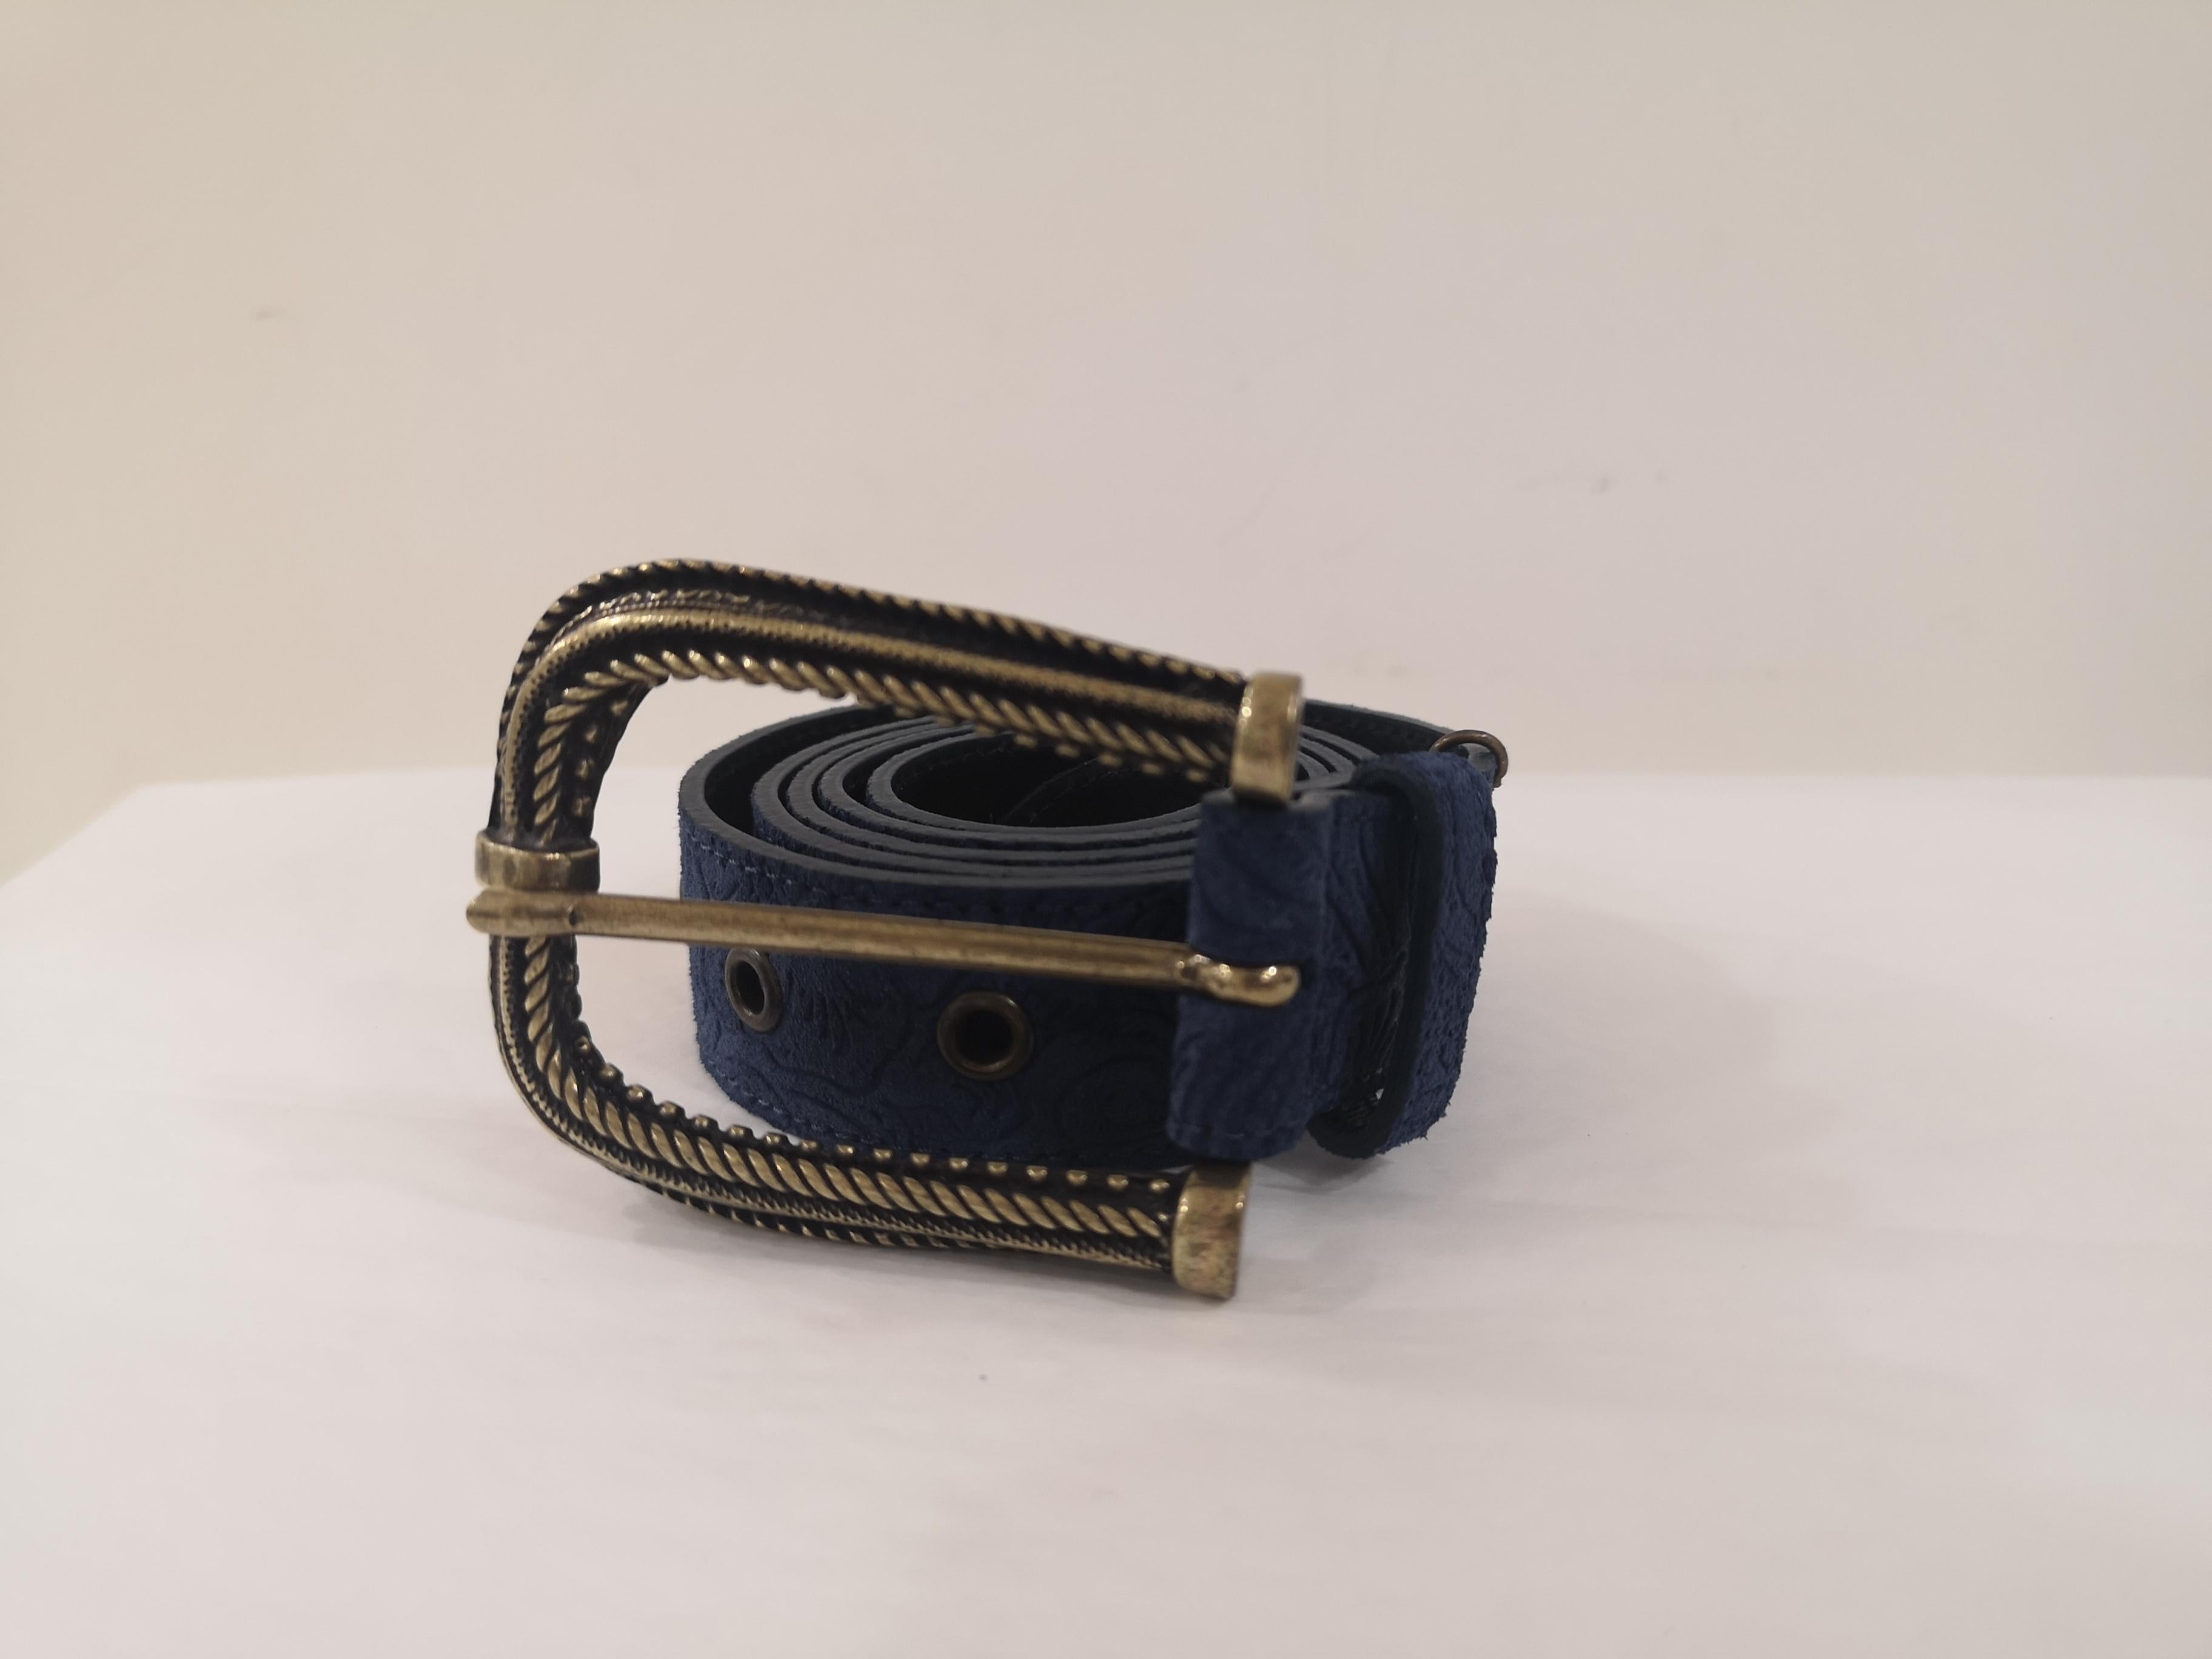 Blue leather suede belt NWOT
totally made in italy
one size
total lenght 105 cm
heigh 3 cm